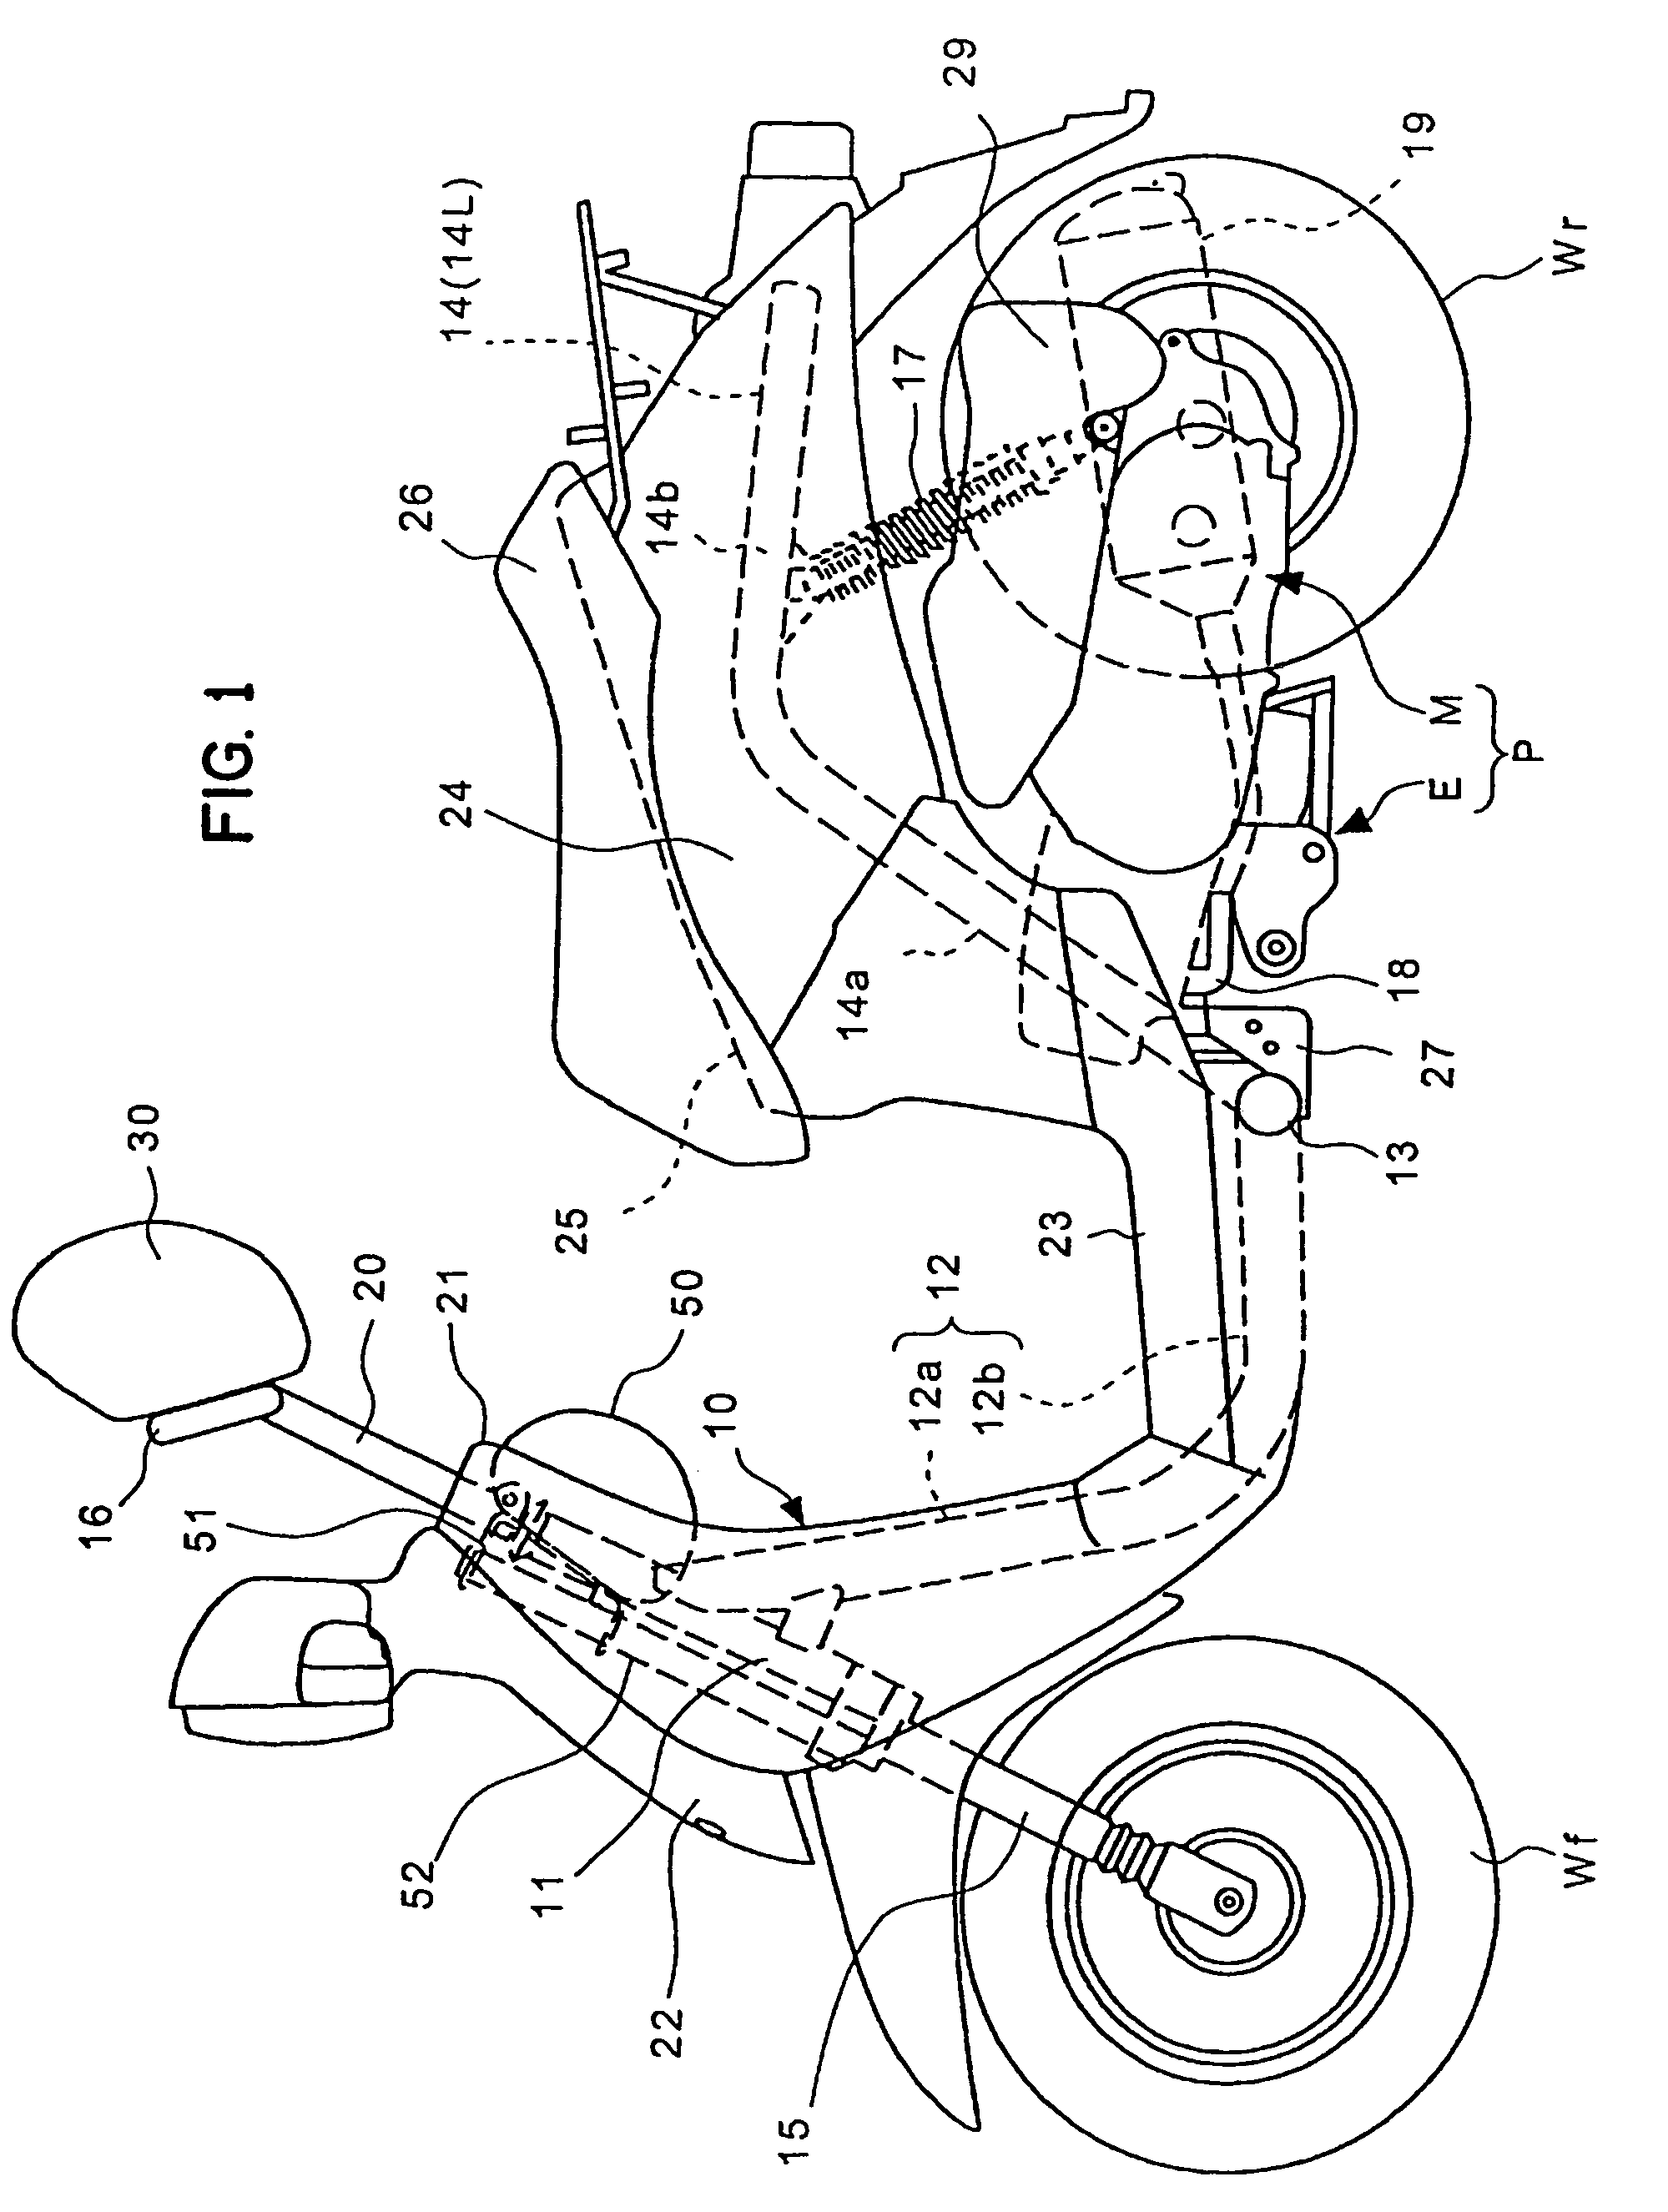 Rider restriction device of two-wheeled vehicle